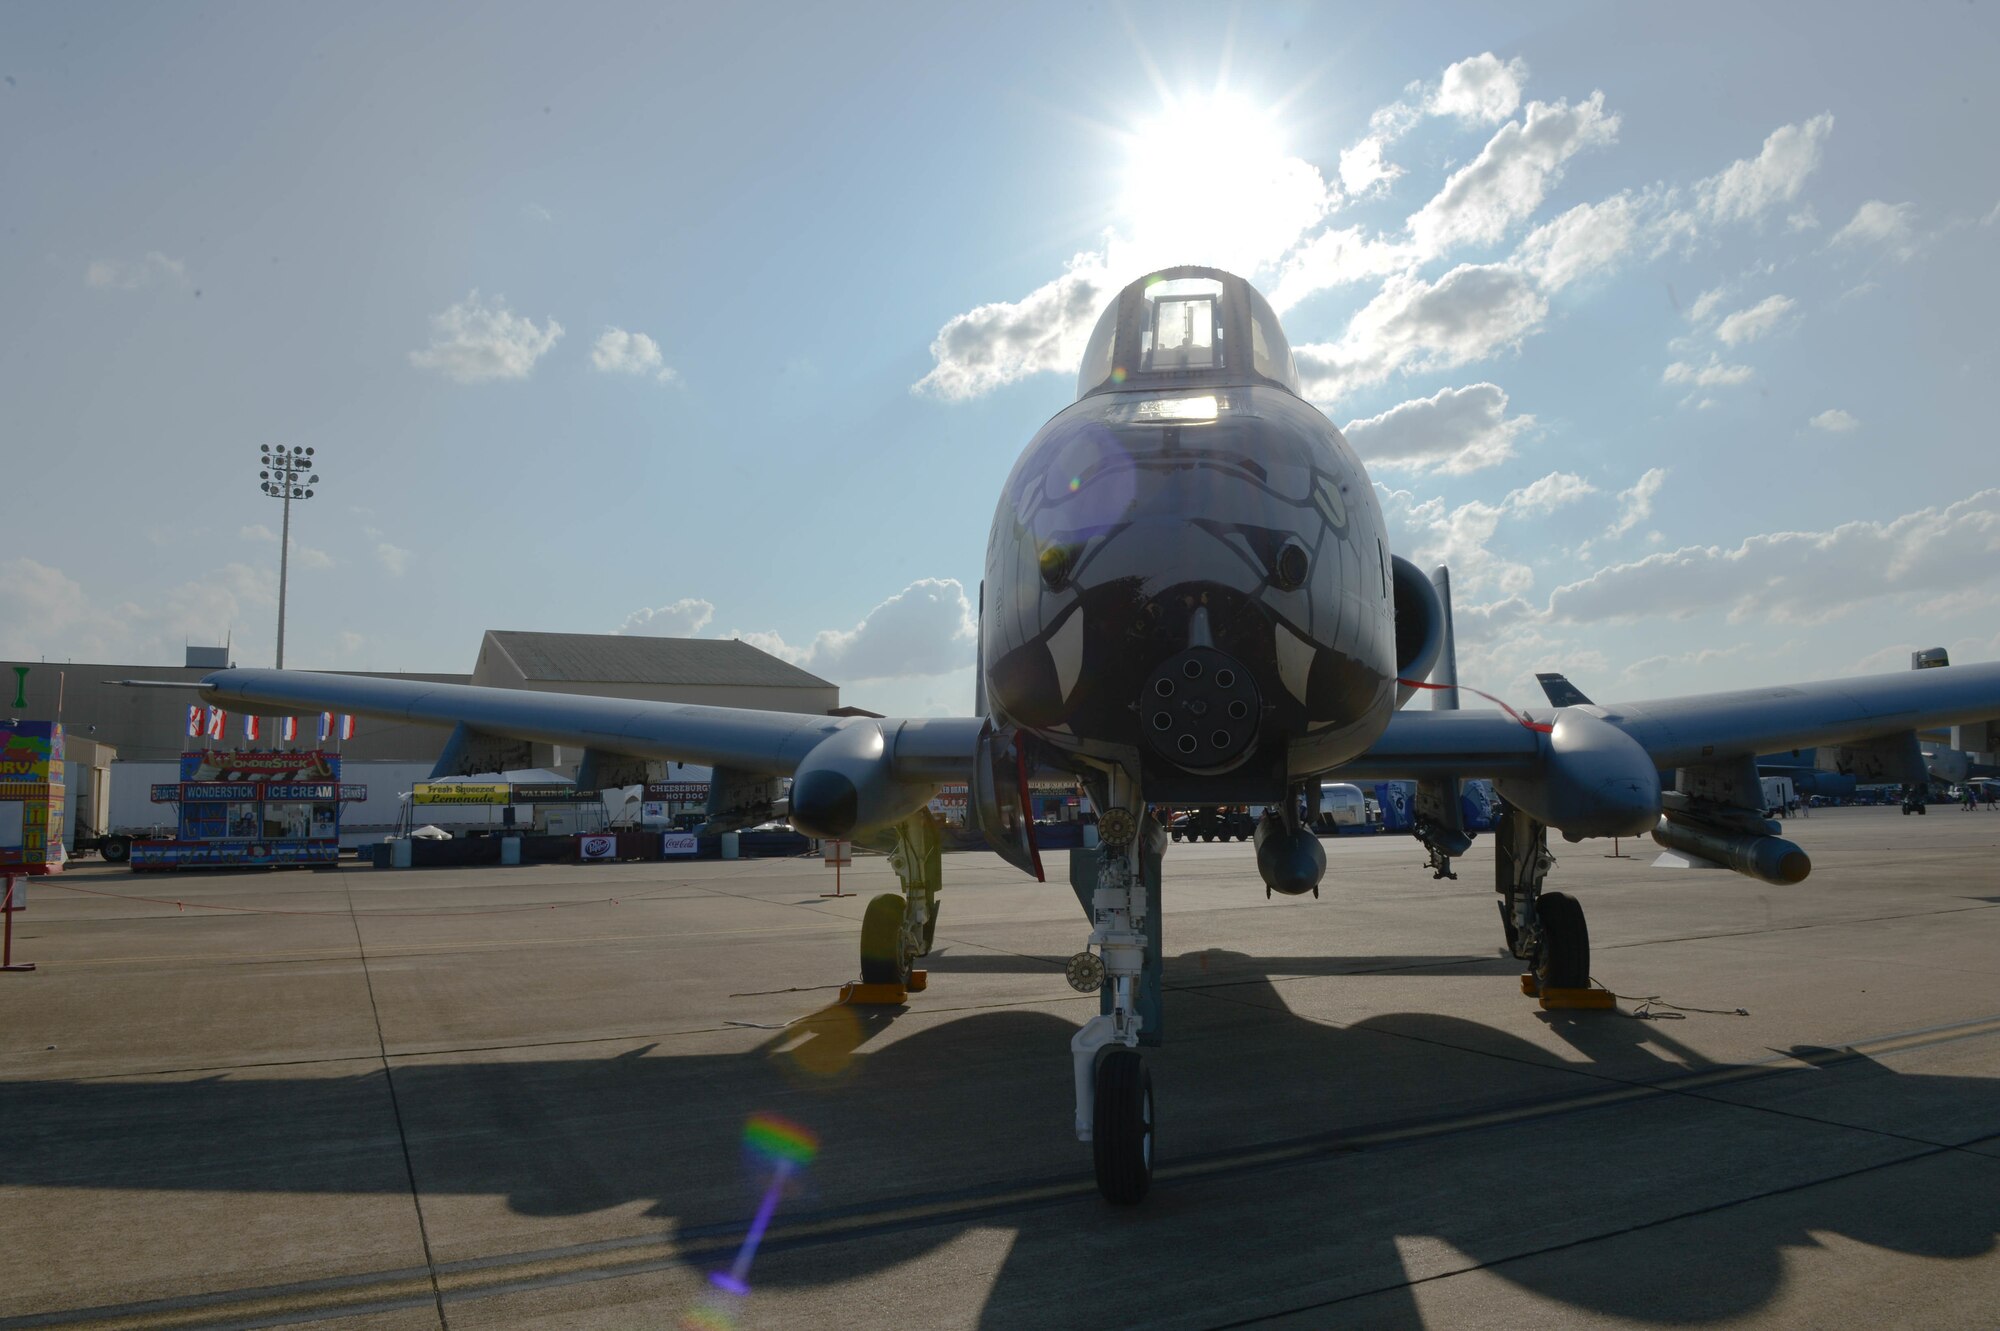 The sun sits atop an A-10 Thunderbolt II sits as a static display during the Defenders of Liberty Air & Space Show at Barksdale Air Force Base, La., May 17, 2019. The airshow was first held in 1933 and is a full weekend of military and civilian aircraft and performances and displays. (U.S. Air Force photo by Tech. Sgt. Will Bracy)